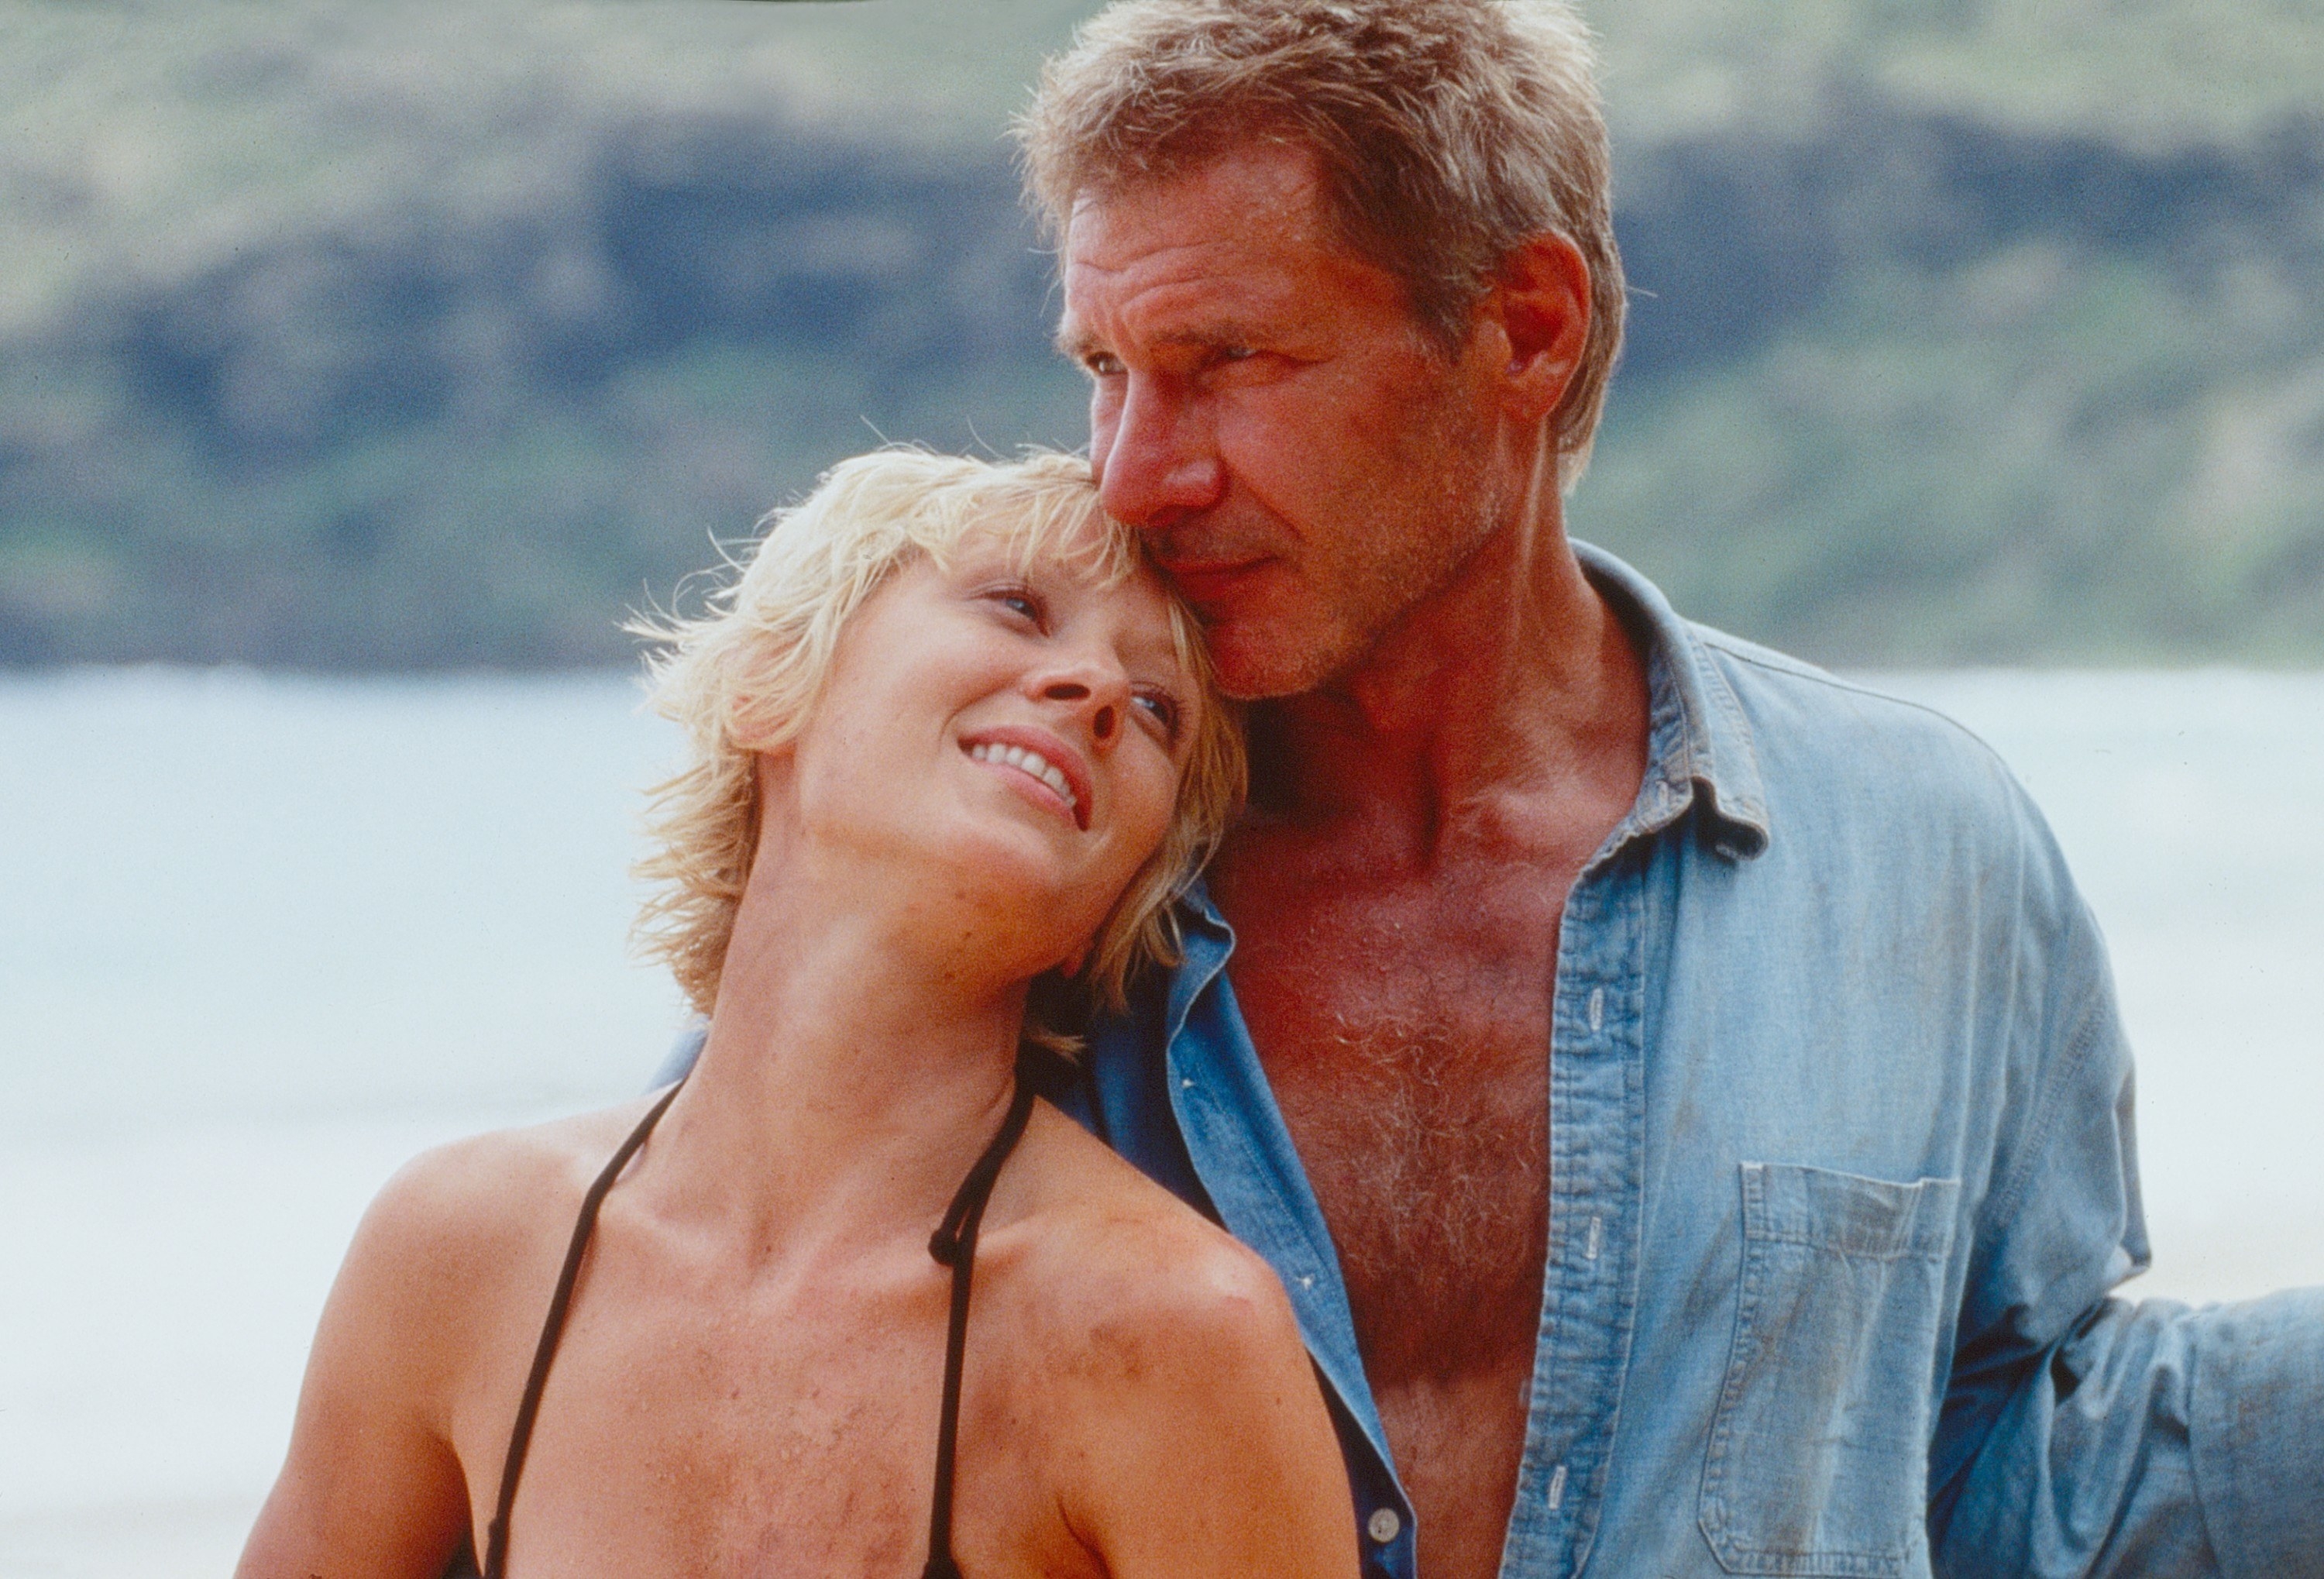 SIX DAYS SEVEN NIGHTS, from left: Anne Heche, Harrison Ford, 1998